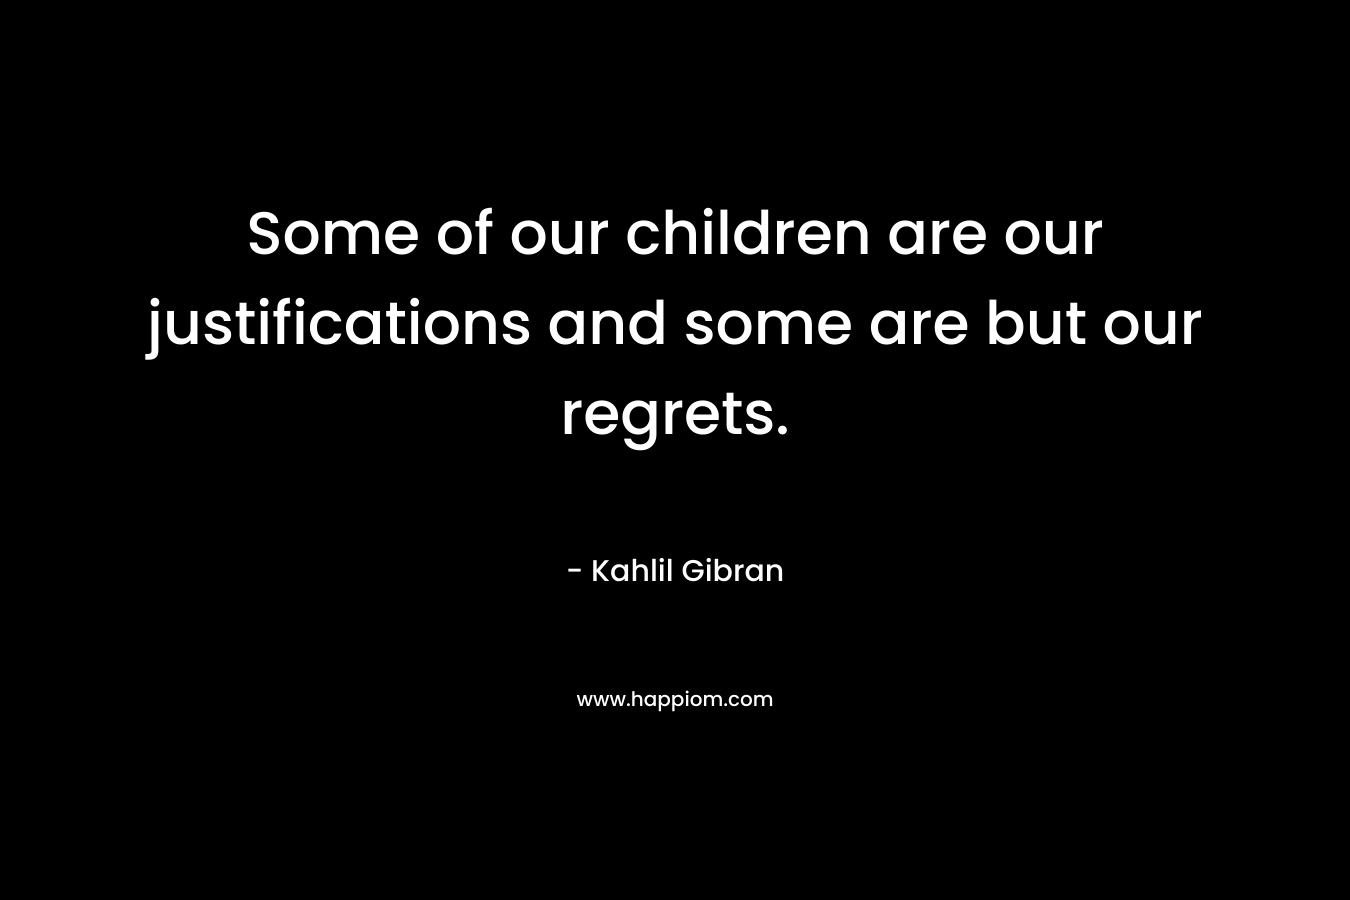 Some of our children are our justifications and some are but our regrets. – Kahlil Gibran